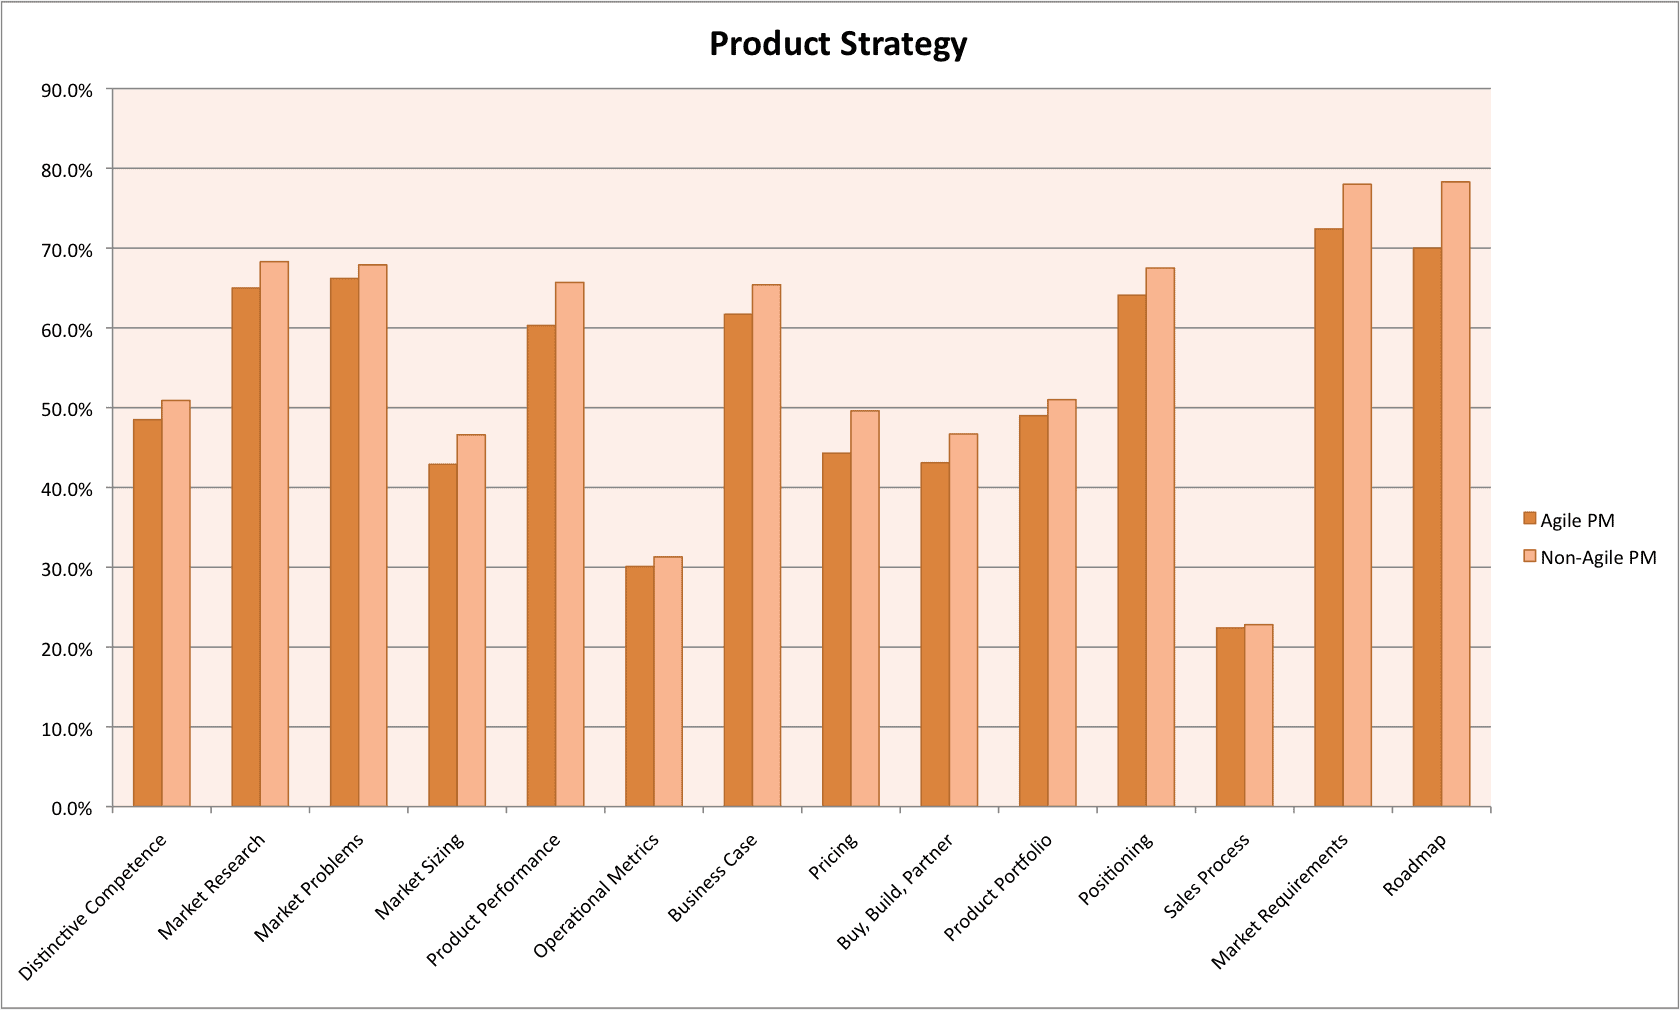 product strategy for agile product managers vs non-agile product managers